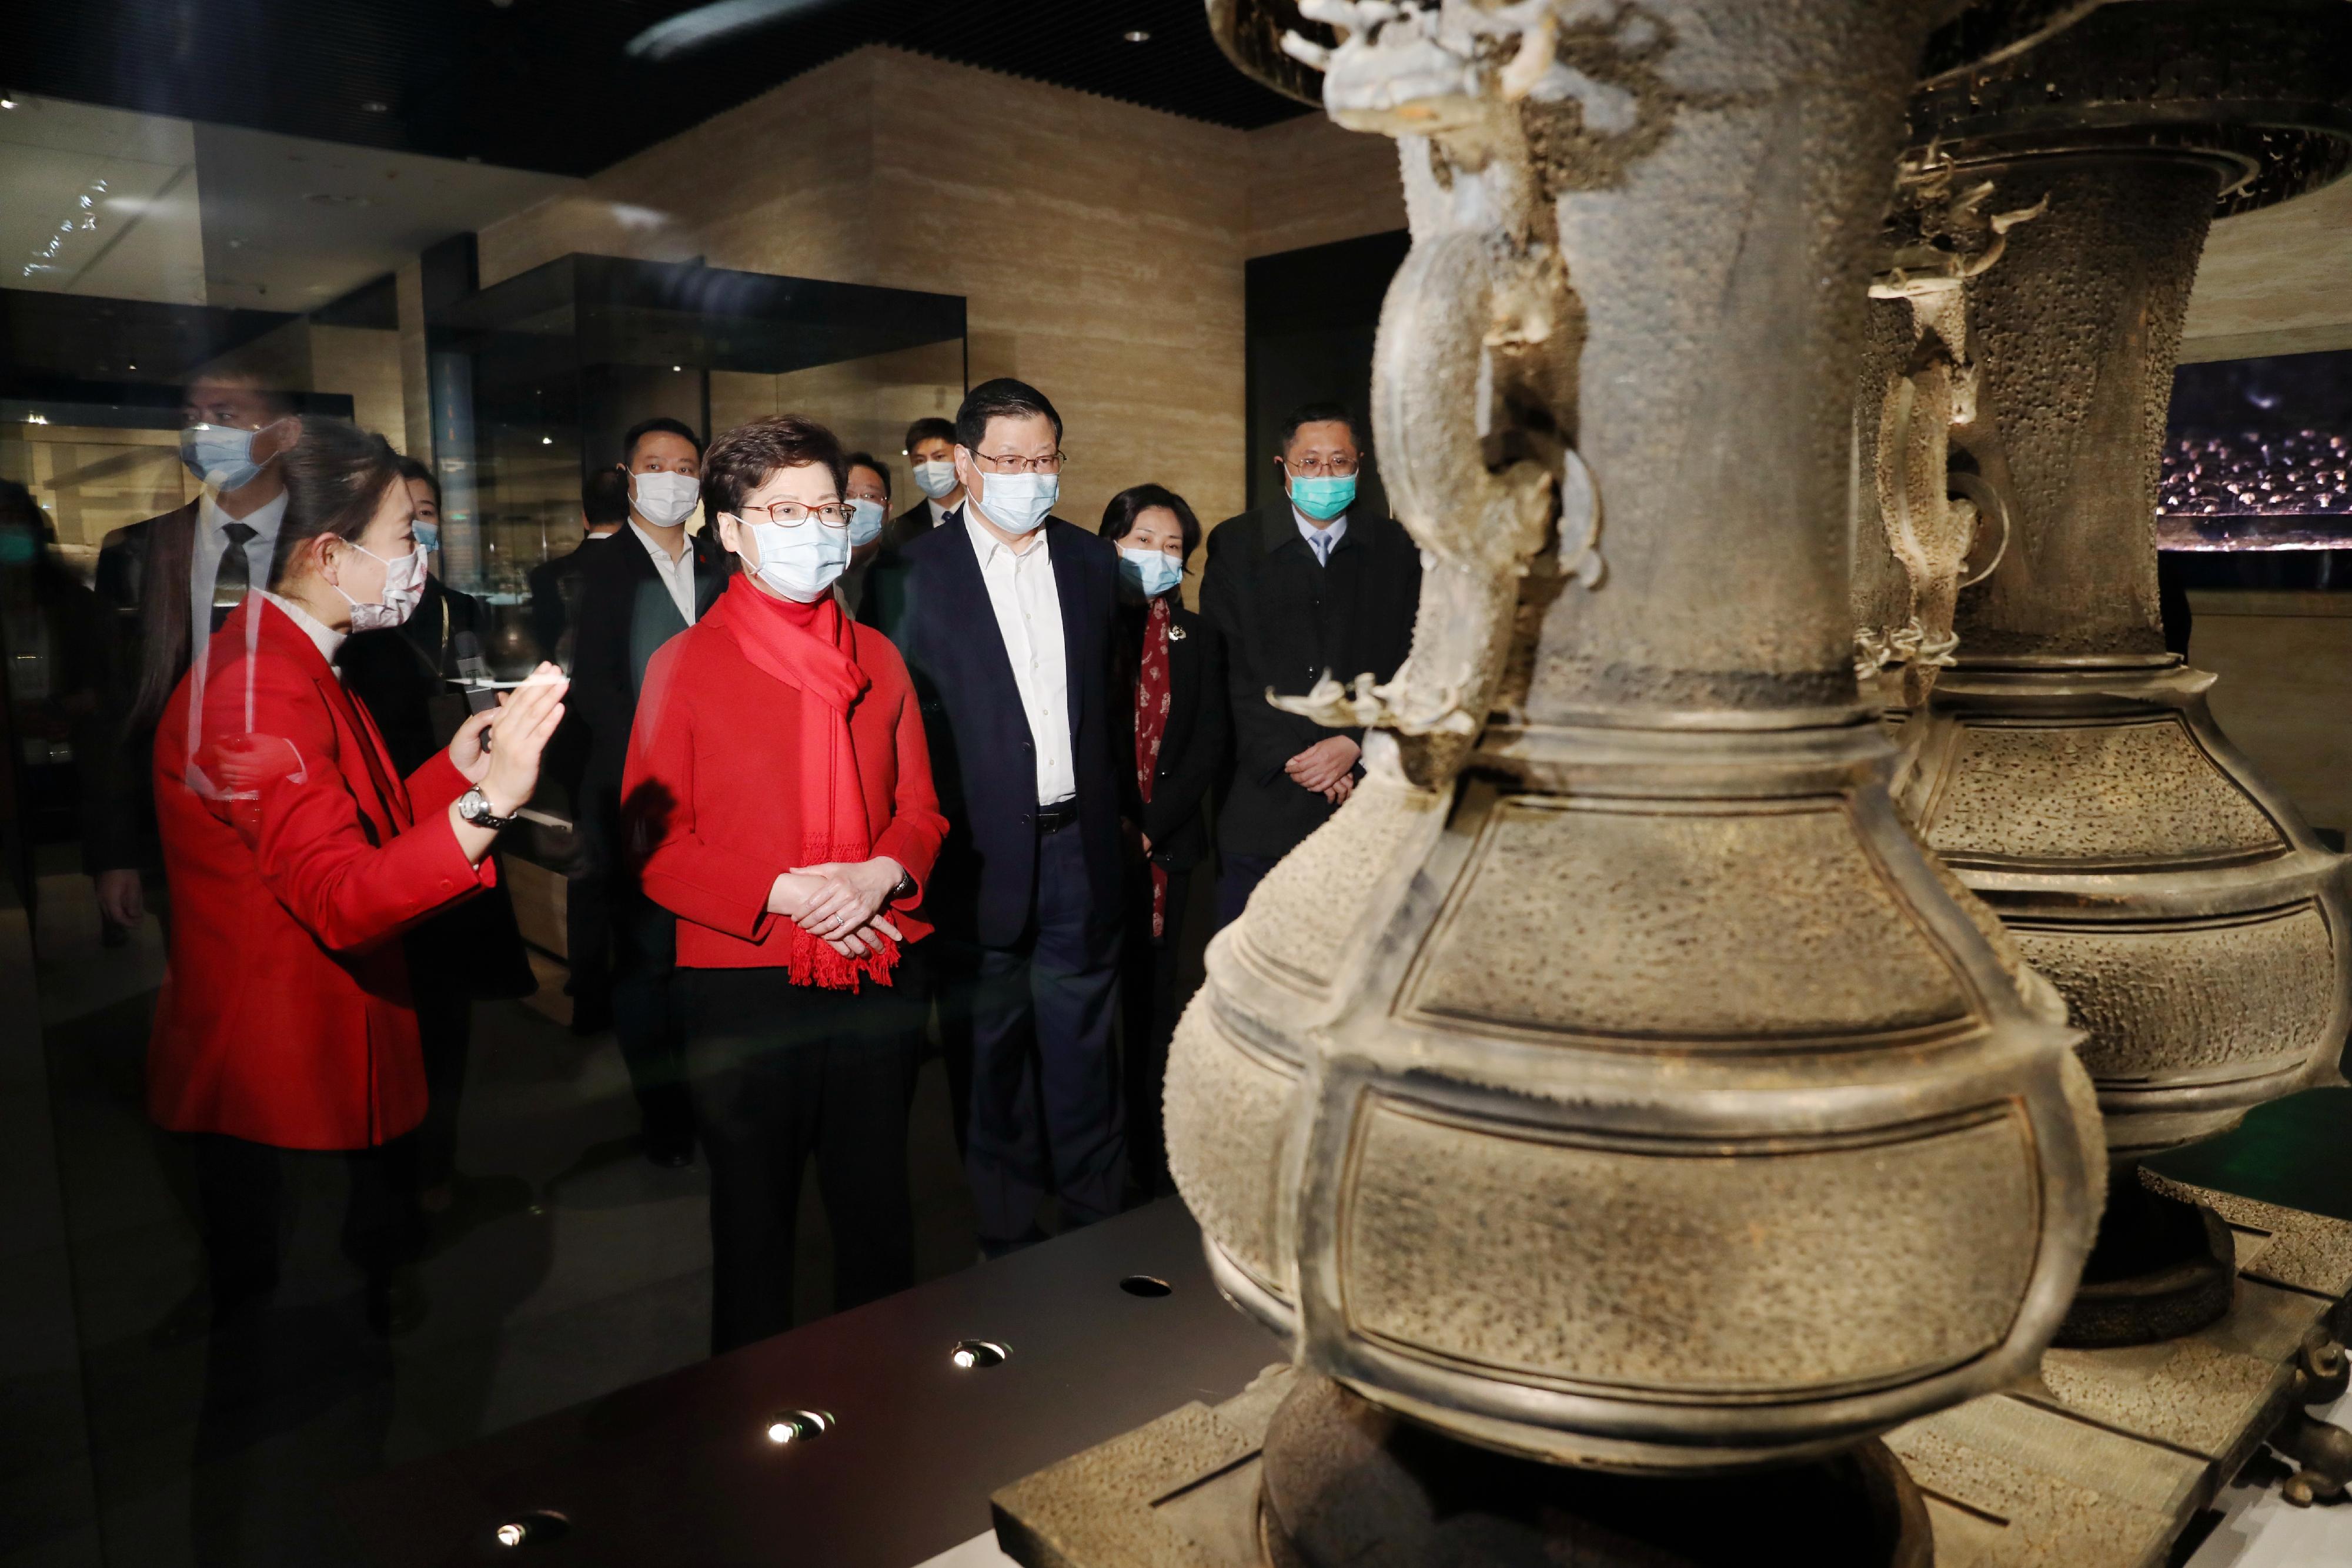 The Chief Executive, Mrs Carrie Lam, visited the new exhibition hall of the Hubei Provincial Museum in Wuhan today (November 30). Photo shows Mrs Lam (front, centre), accompanied by the Secretary of the CPC Hubei Provincial Committee, Mr Ying Yong (front, right), viewing exhibits in the museum.